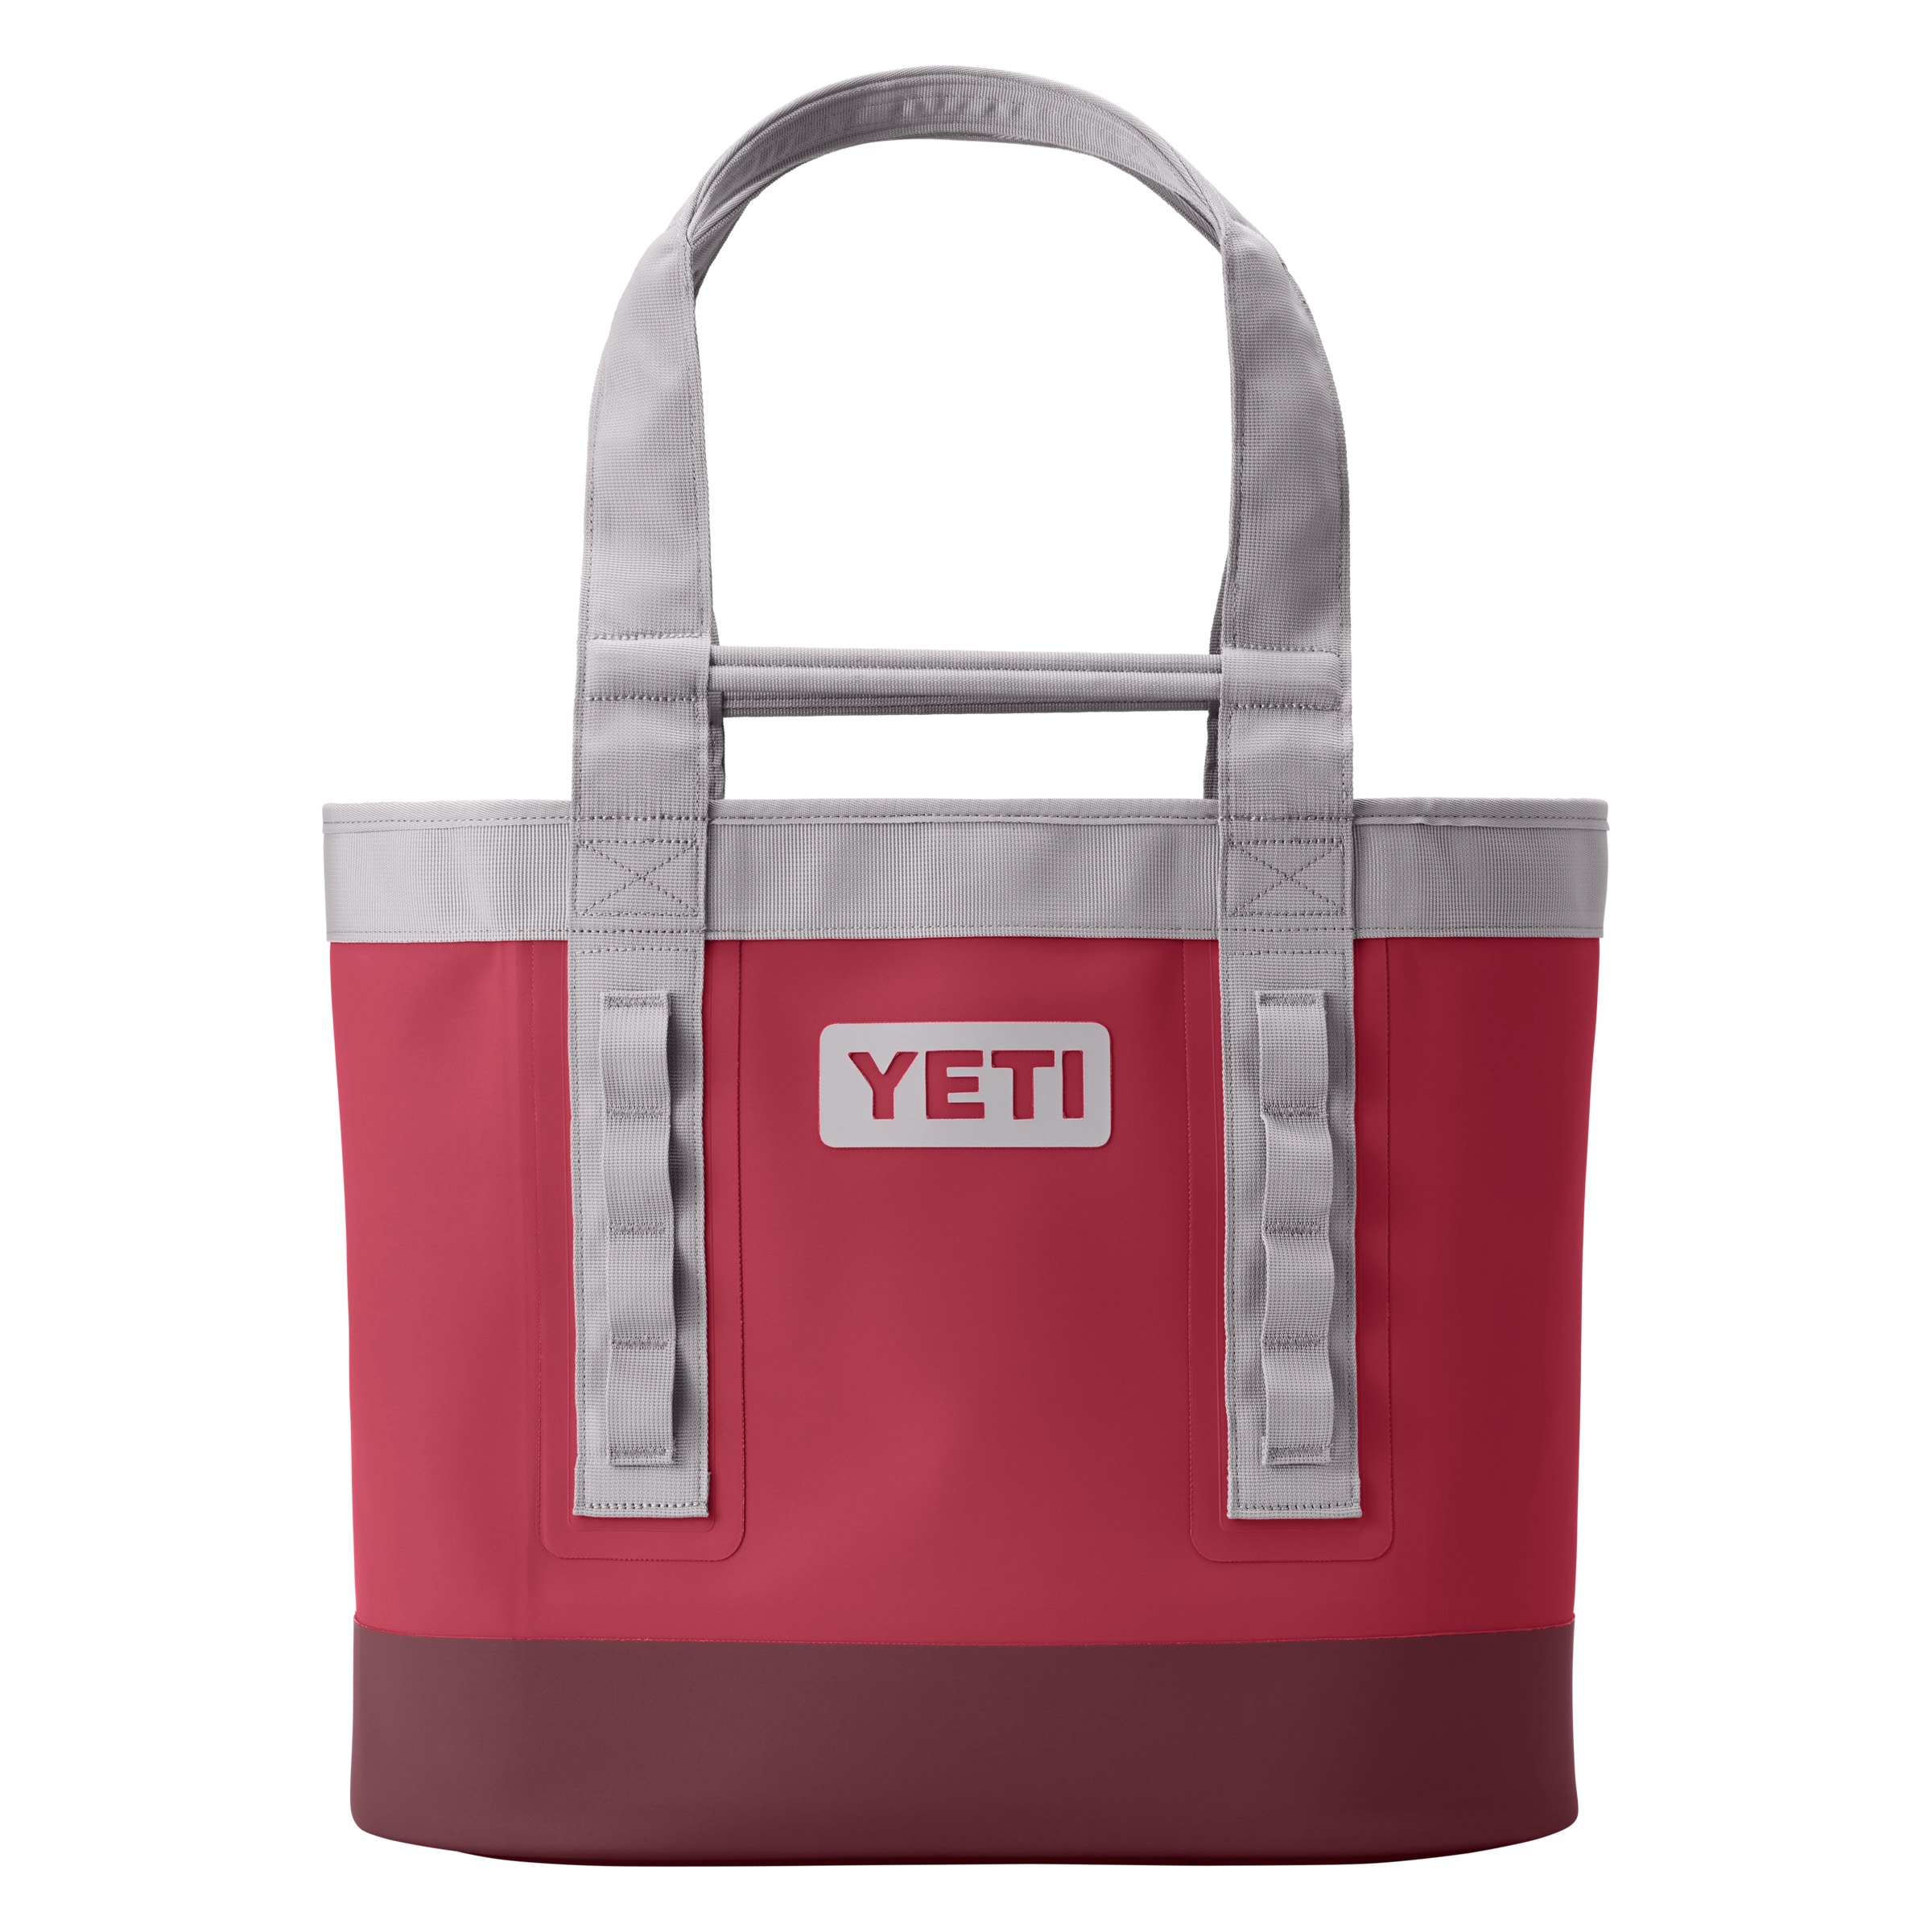 YETI Camino Carryall 35 Harvest Red in the Gear Storage